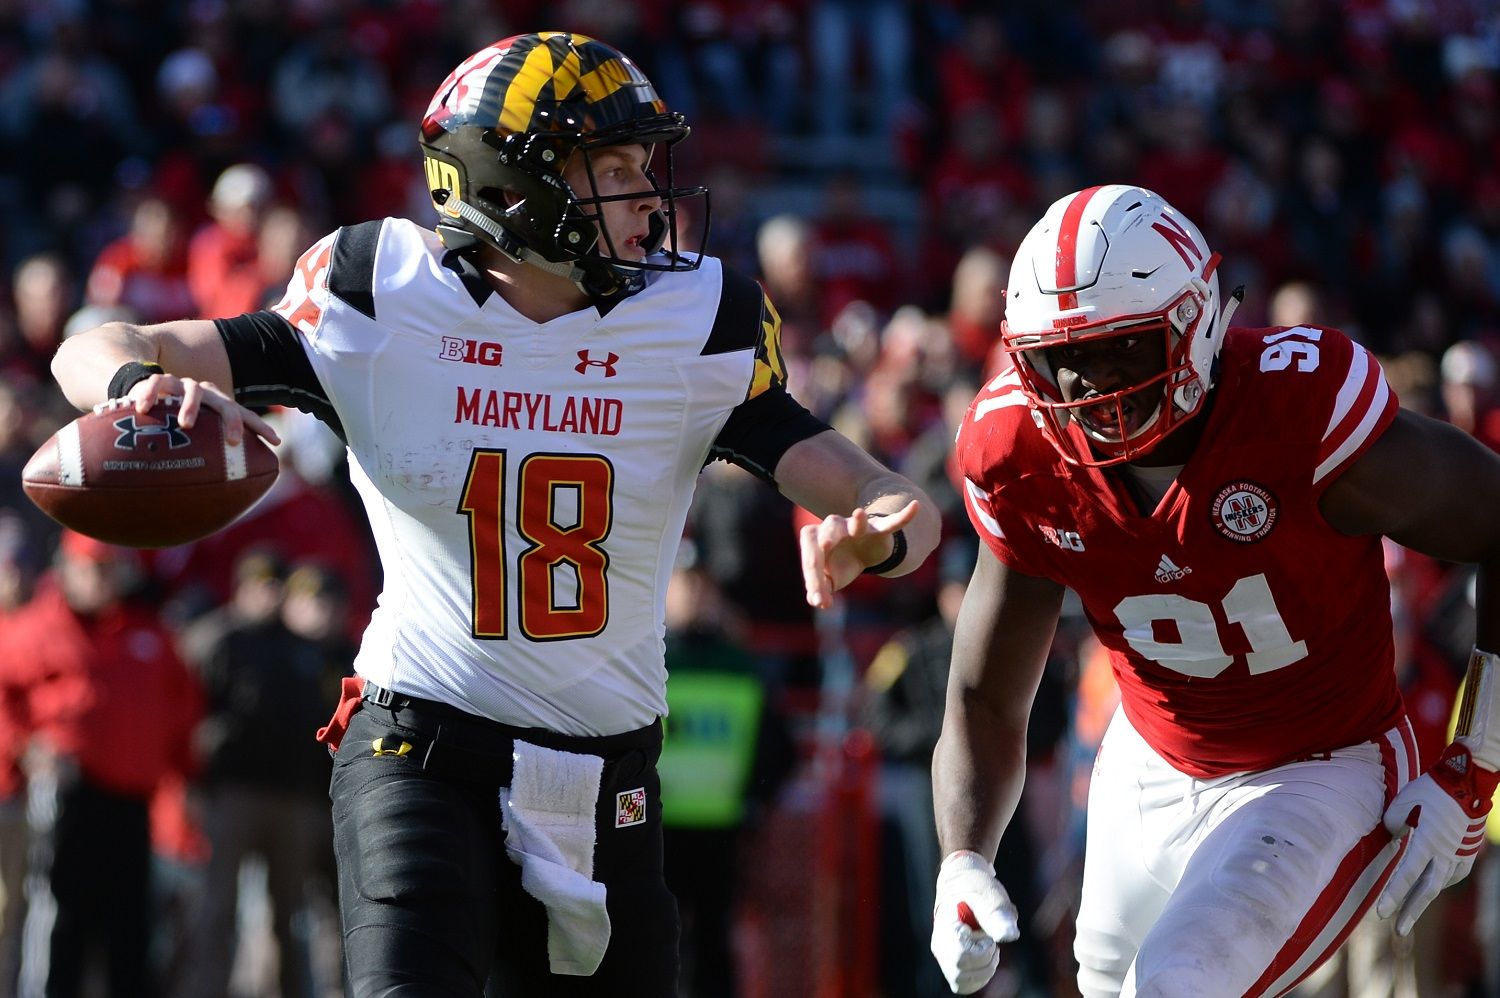 LINCOLN, NE - NOVEMBER 19: Quarterback Max Bortenschlager #18 of the Maryland Terrapins passes ahead of the rush from defensive lineman Adam McLean #91 of the Maryland Terrapins at Memorial Stadium on November 19, 2016 in Lincoln, Nebraska. Nebraska defeated Maryland 28-7.  (Photo by Steven Branscombe/Getty Images)